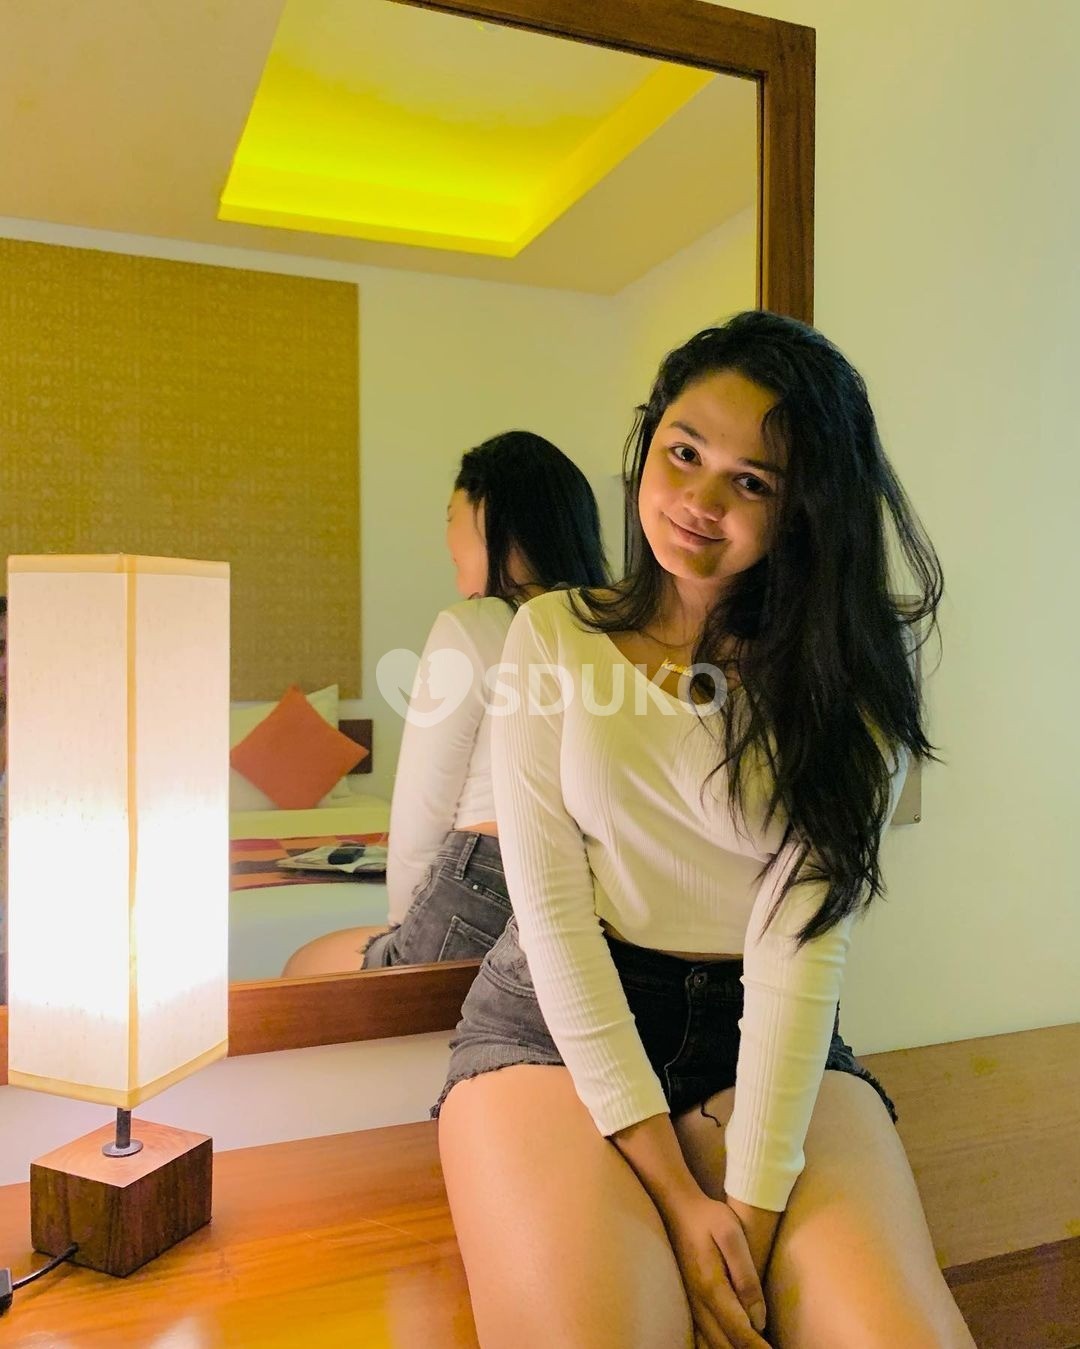 ™(24×7 POWAI ALL AREA)❣️BEST VIP HOT COLLEGE GIRL GENUINE SERVICE PROVIDE UNLIMITED SHOTS ALL TYPE SEX ALLOW BOOK